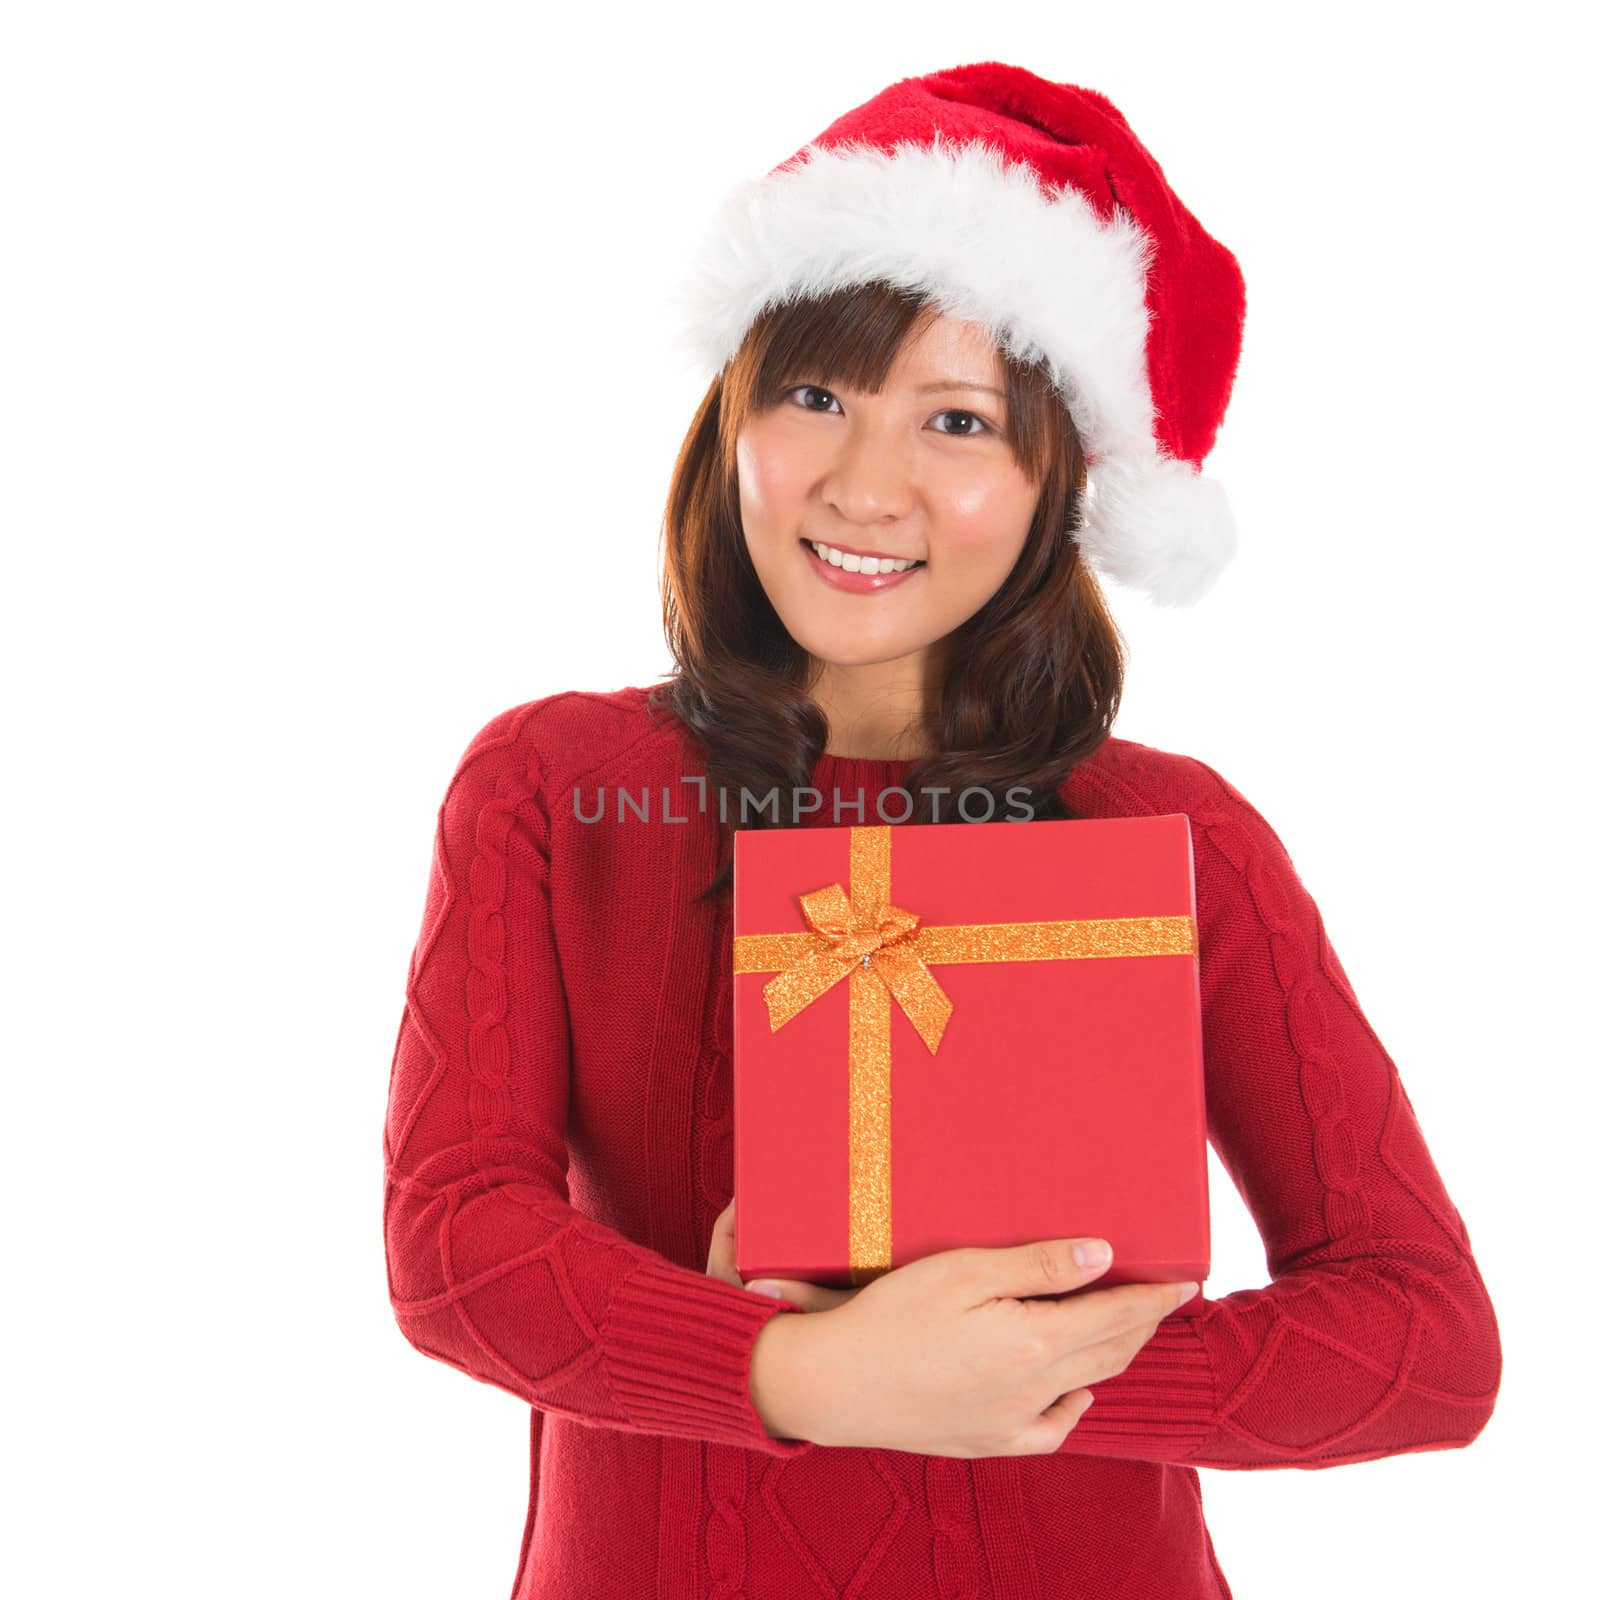 Asian Christmas Girl Holding Gift Box and Smiling, cute Asian beauty model, isolated on white background